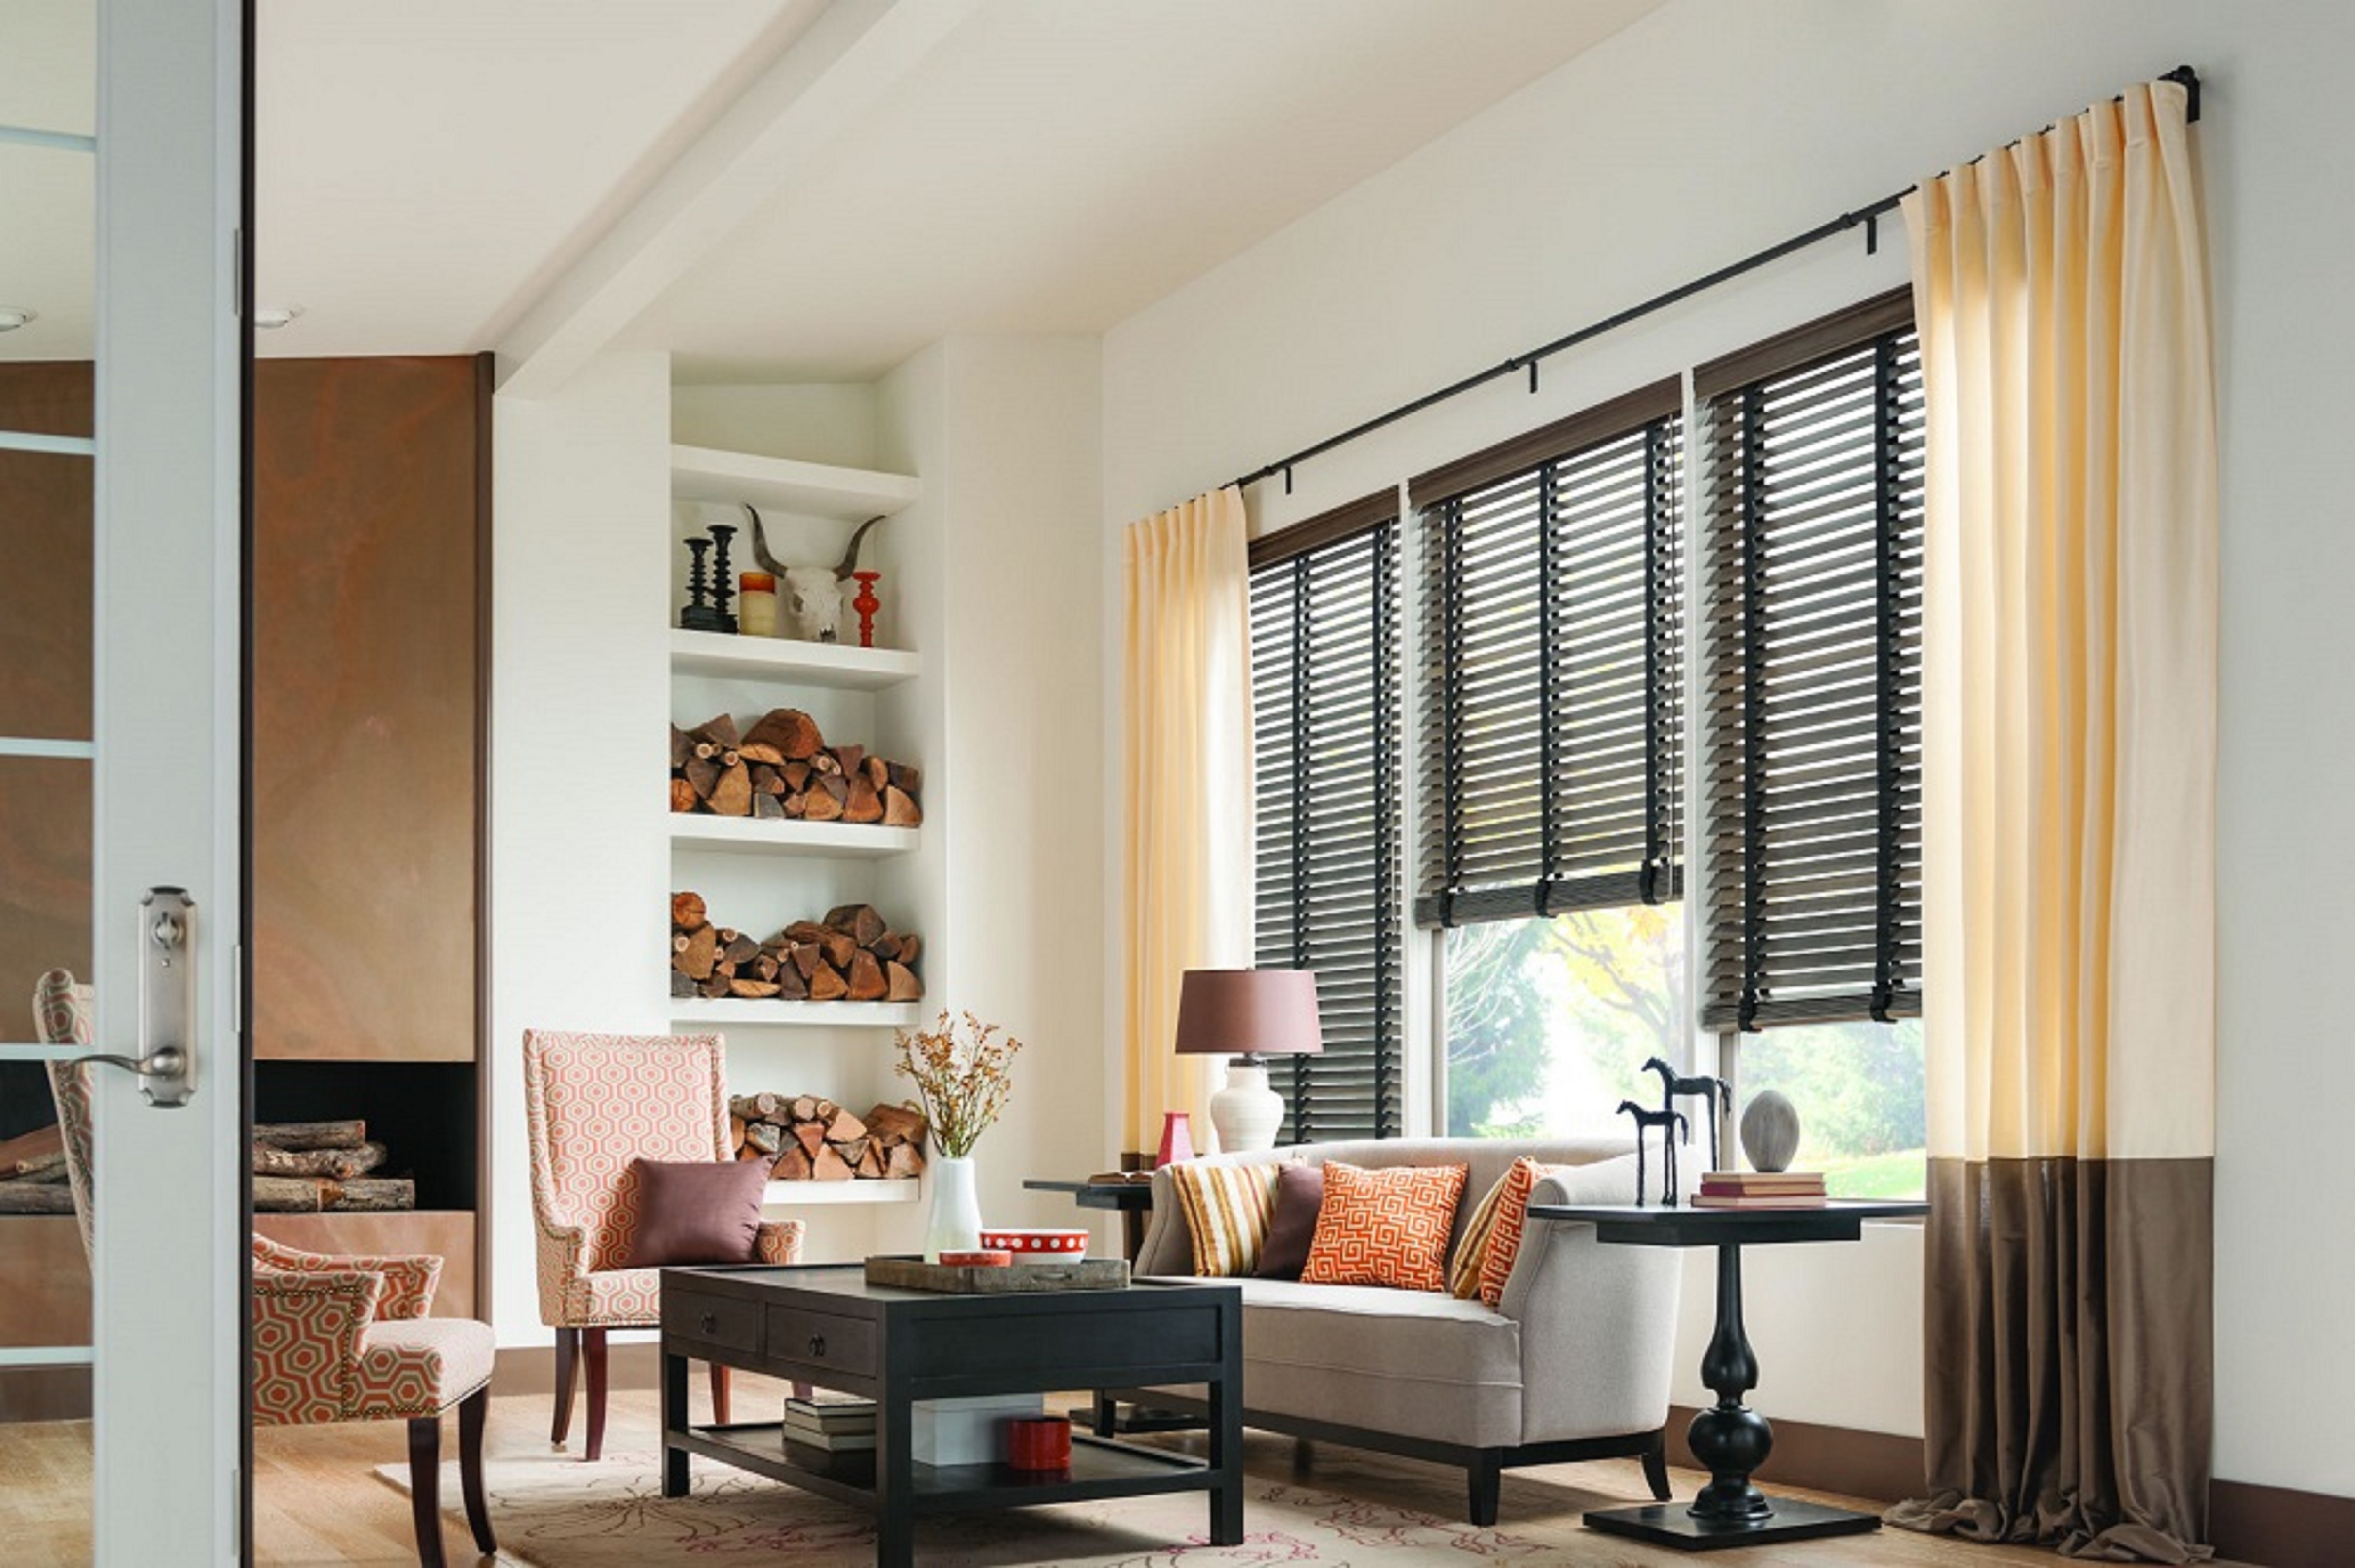 Image For Post | Source: https://www.simplyblinds.co/faux-wood-blinds/